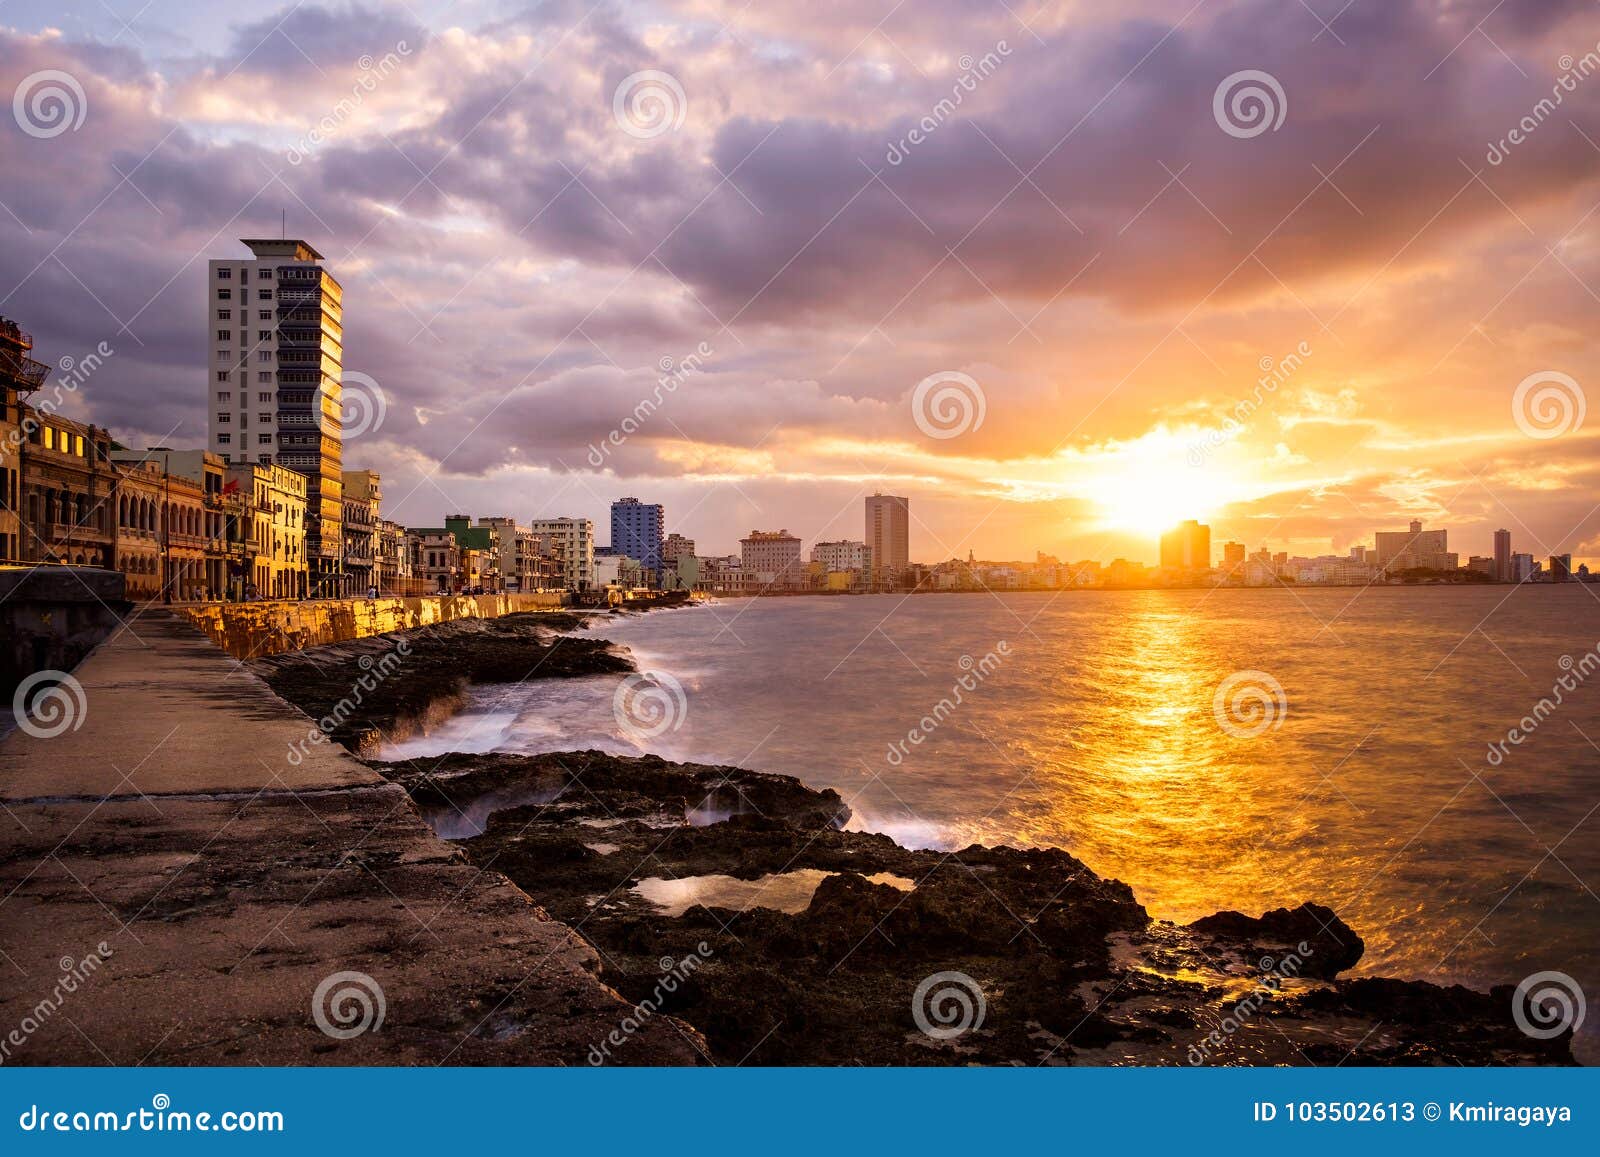 romantic sunset at the malecon seawall in havana